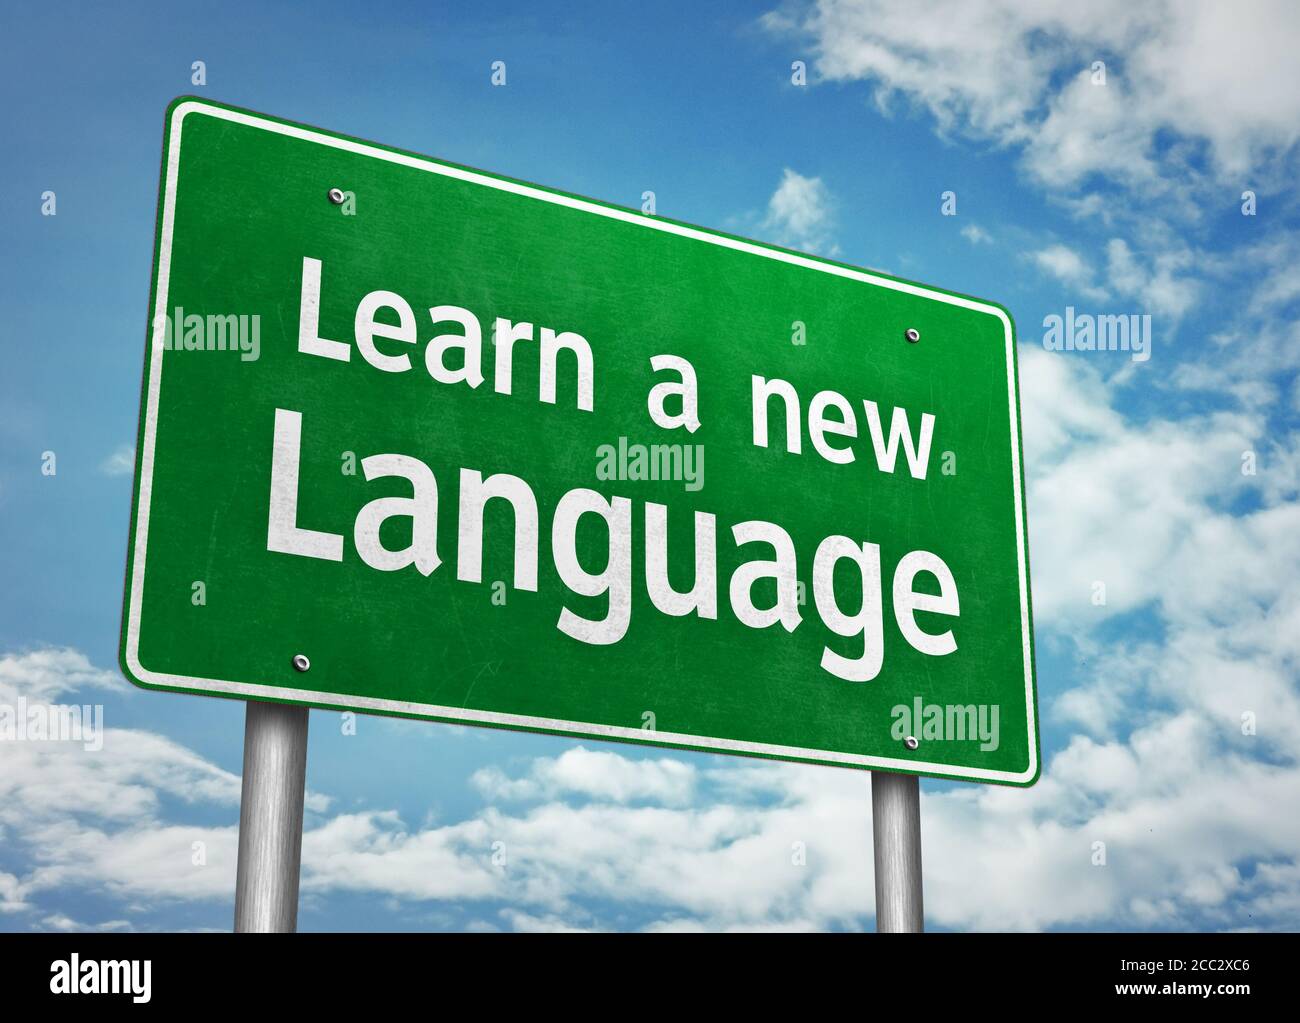 Learn a new Language Stock Photo